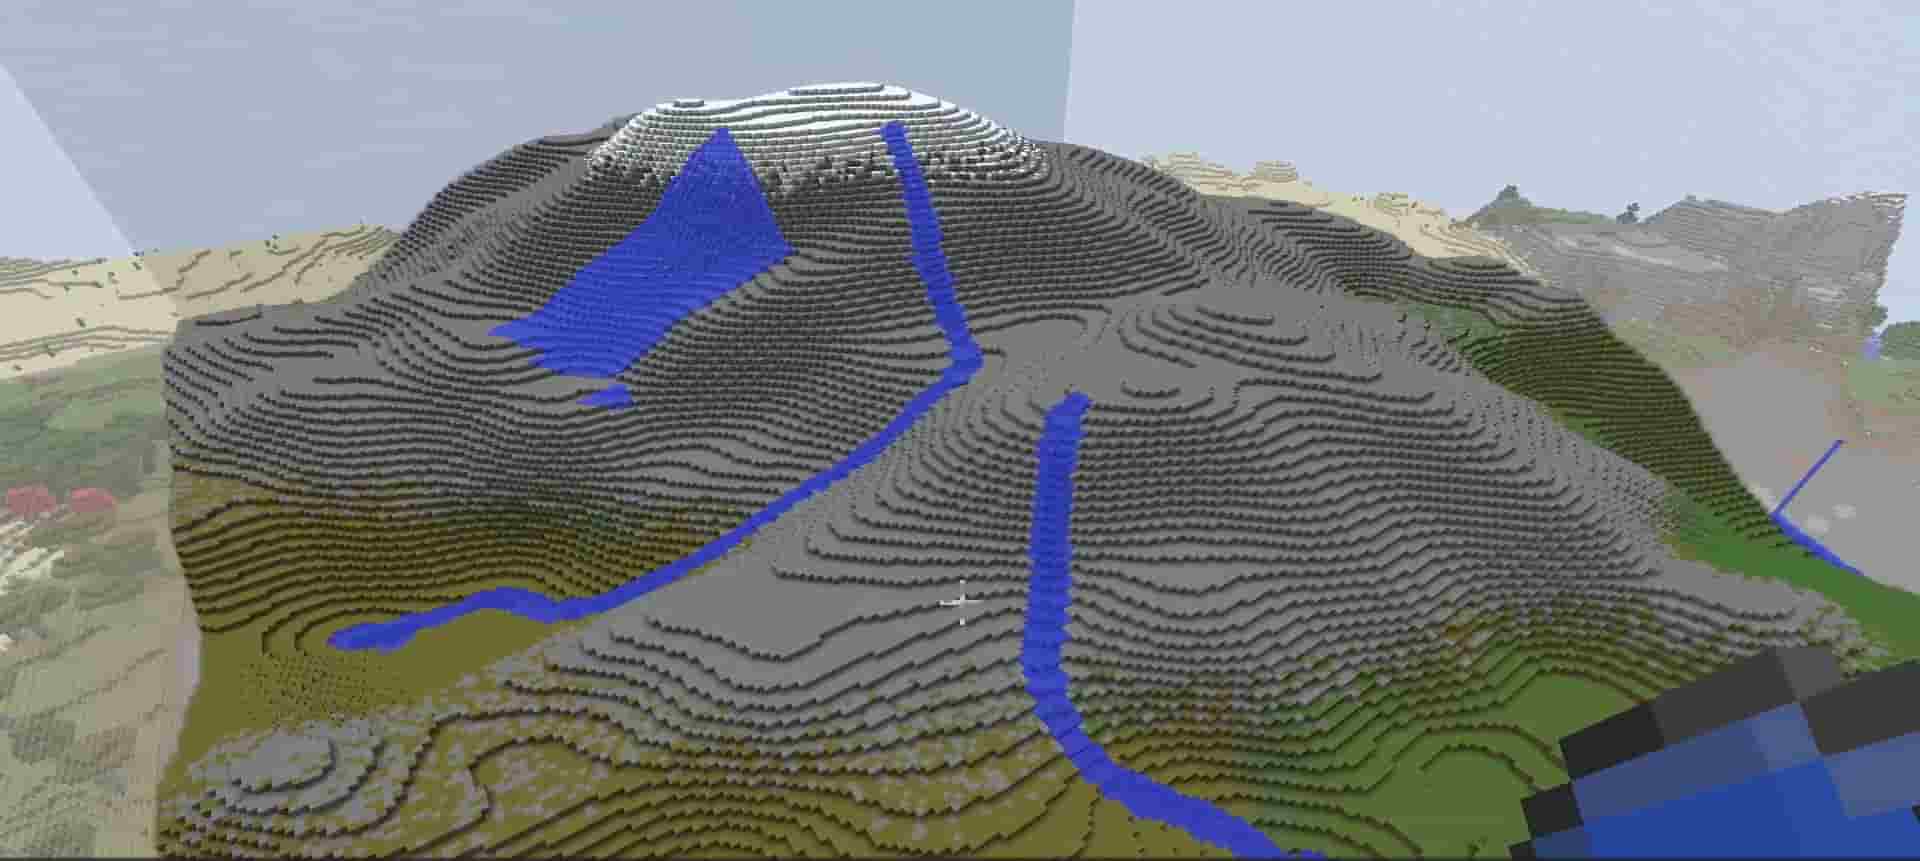 Creates A Landscape With More Accurate River Generation In Minecraft Using Python - Python Project With Source Code